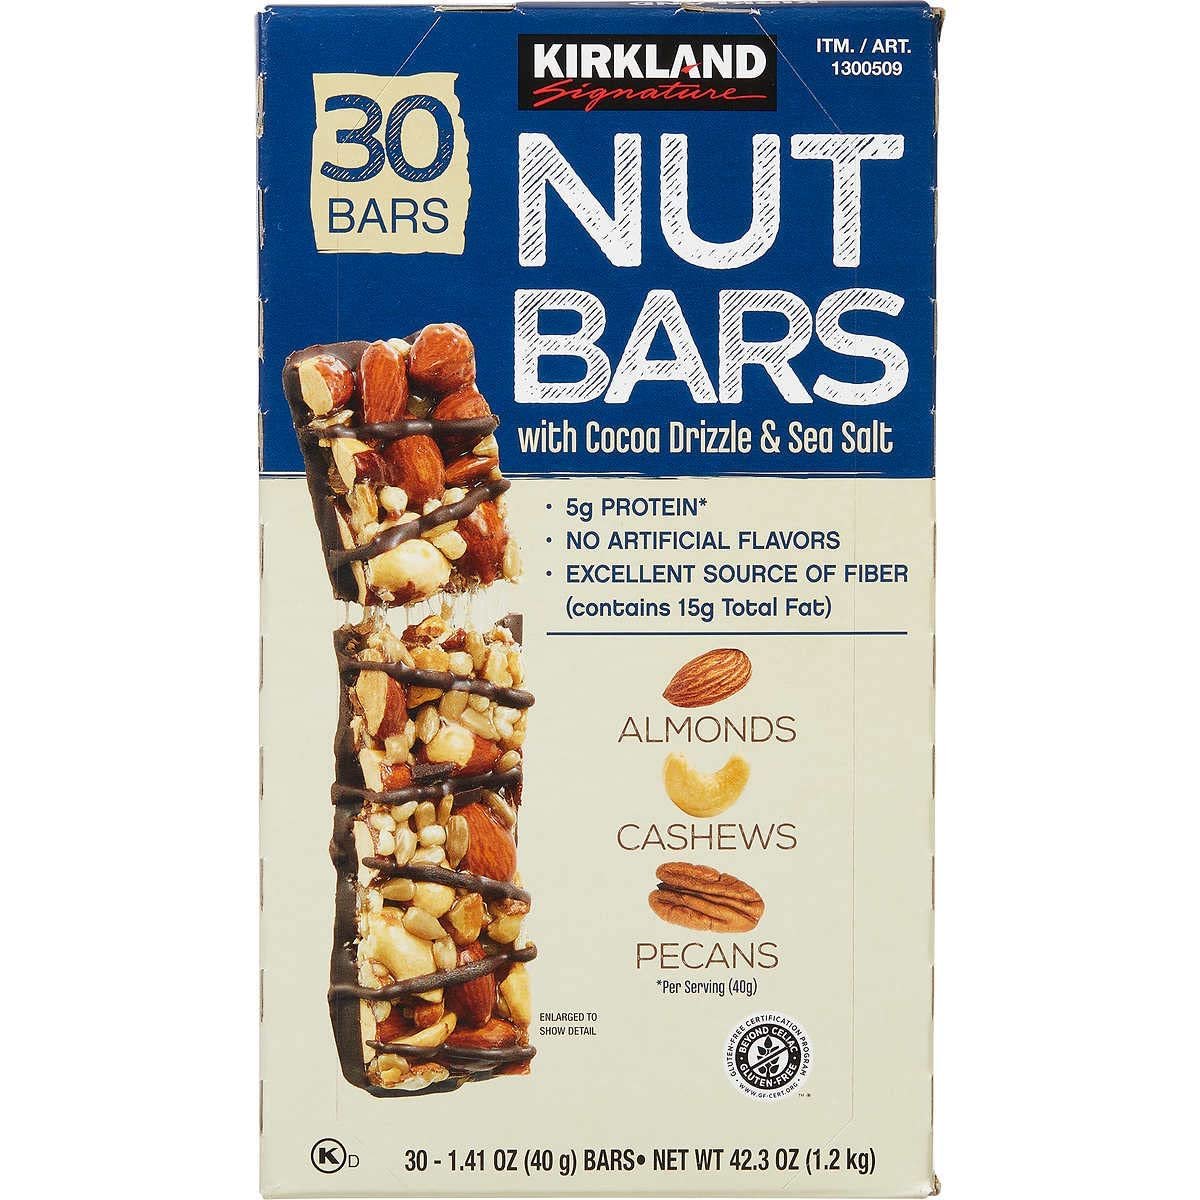 Kirkland Signature Nut Bars with Cocoa Drizzle & Sea Salt, 30 Bars - Almonds - Cashew - Pecans -  Pack of 2